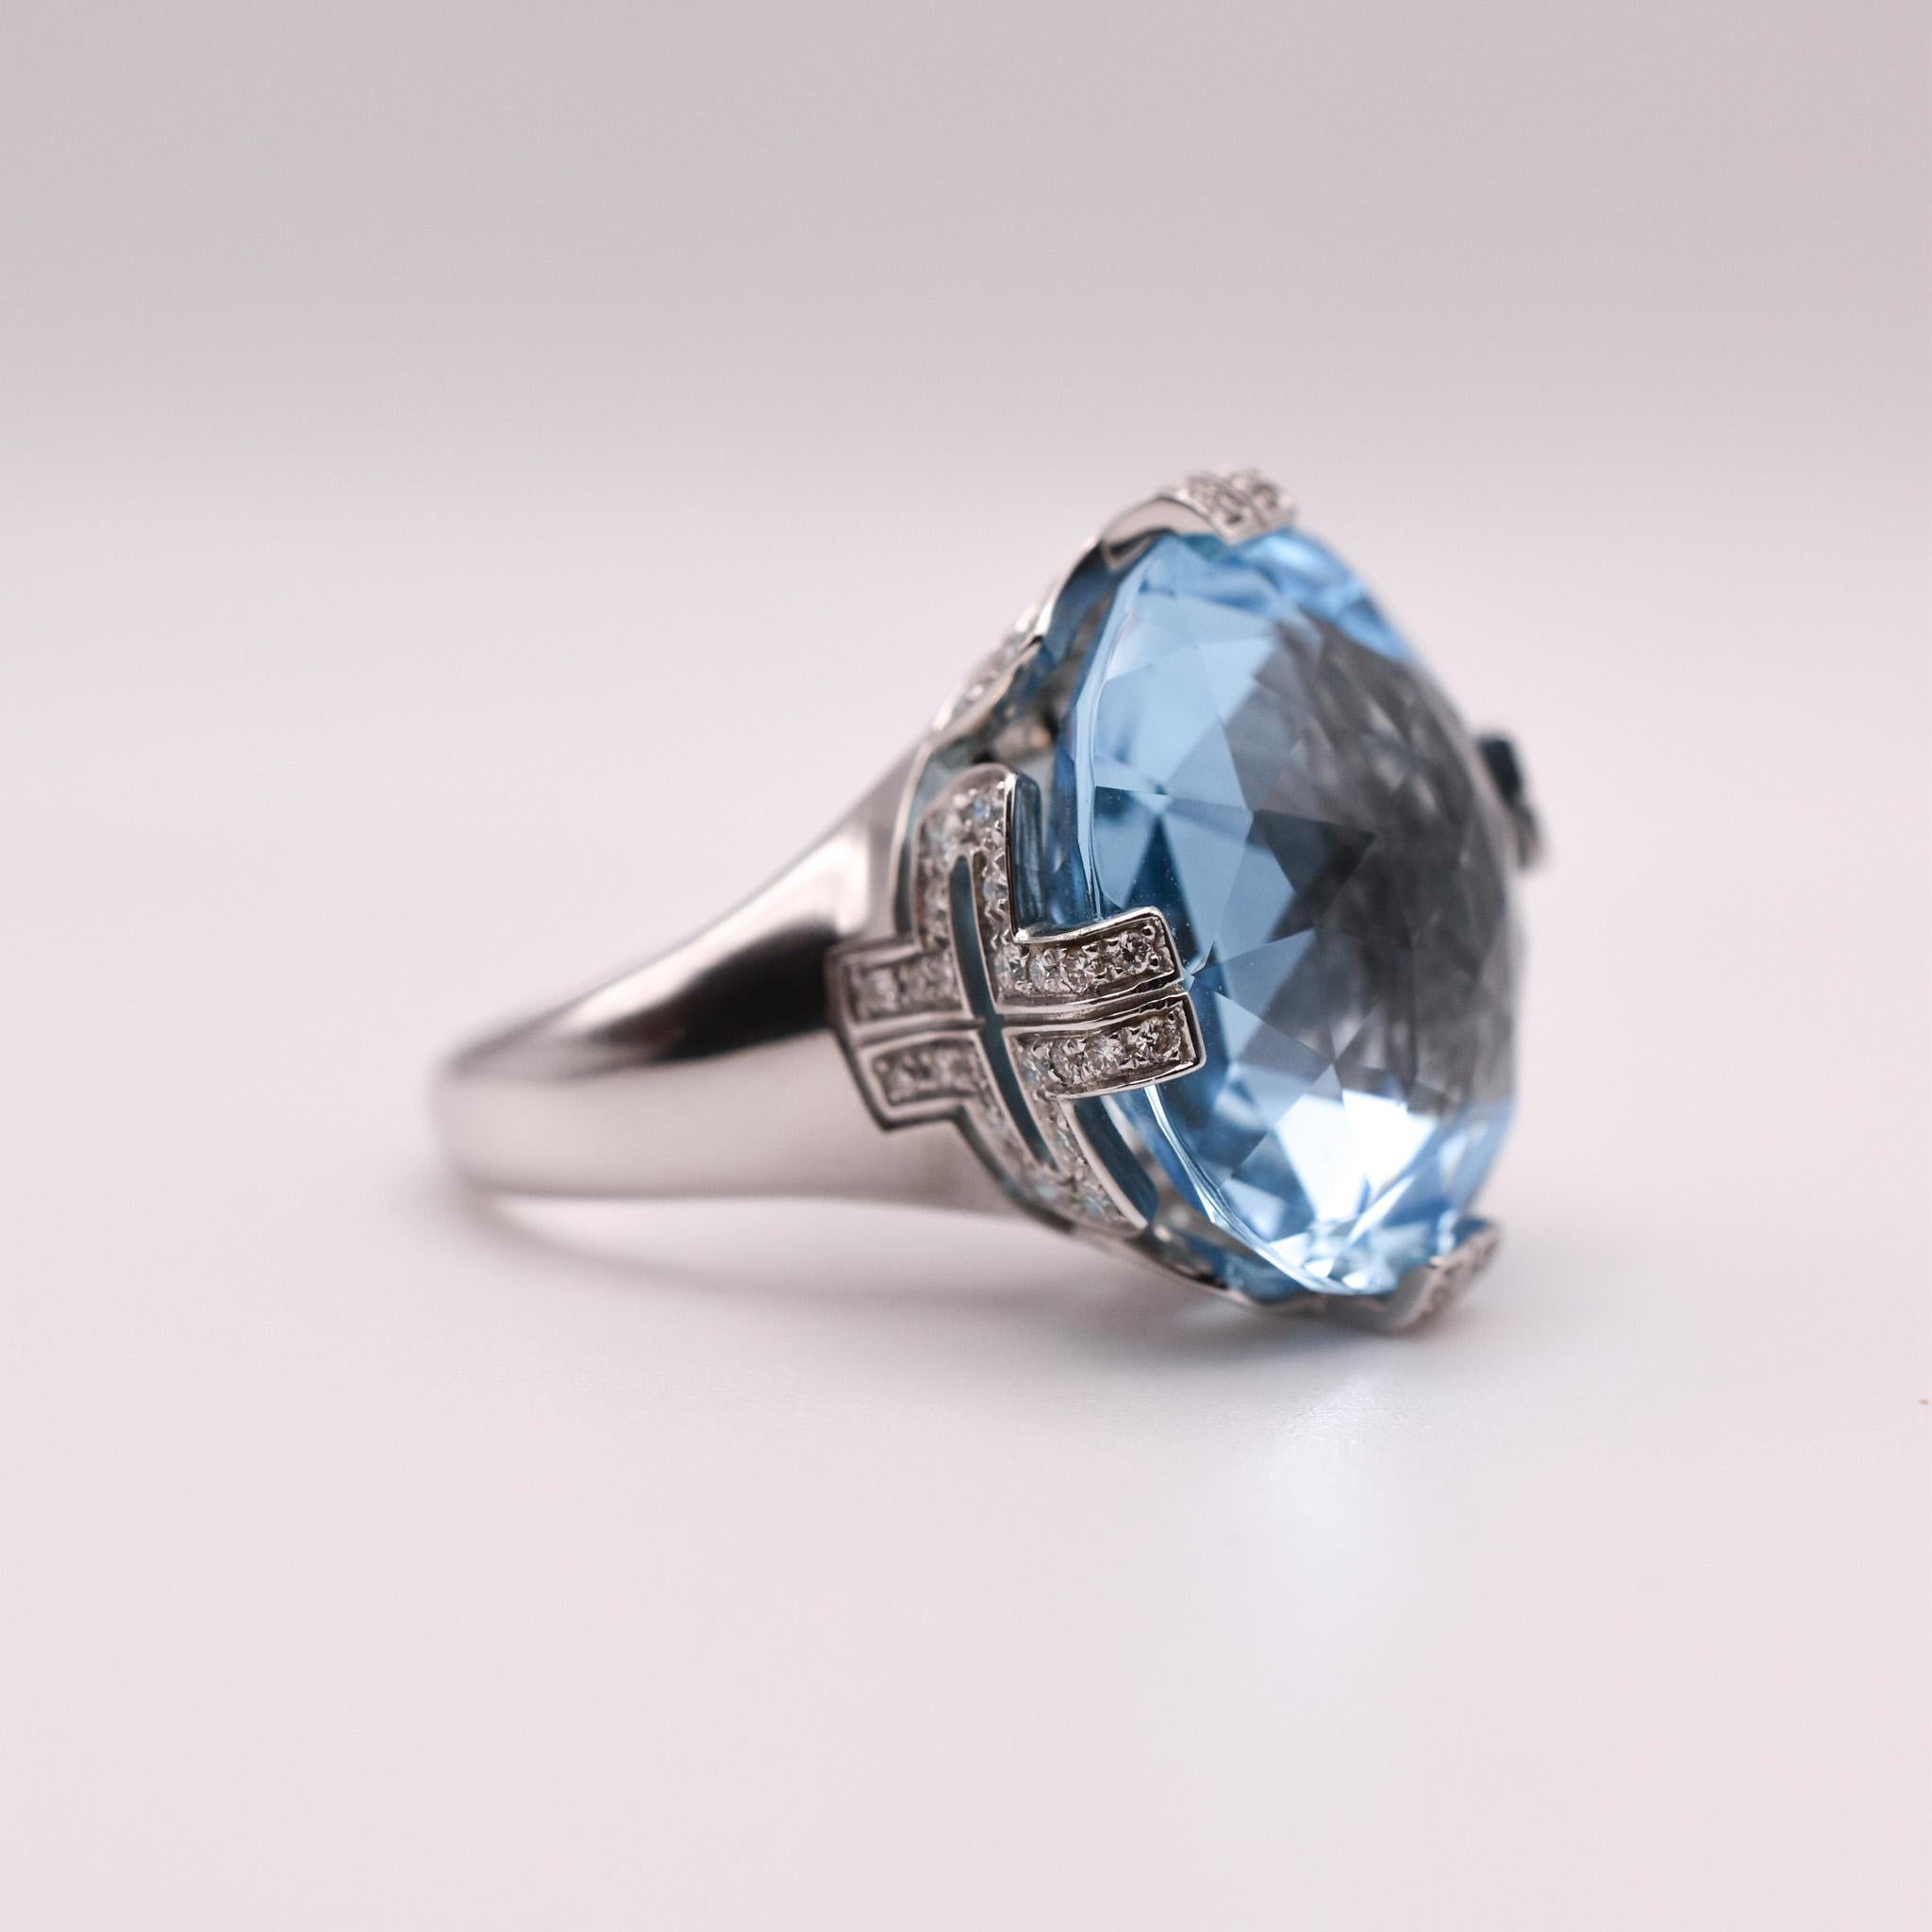 Bulgari 'Parenthesis' Blue Topaz & Diamond Cocktail Ring in 18k White Gold. 
Made in Italy, circa 1980.

US finger size 6.5